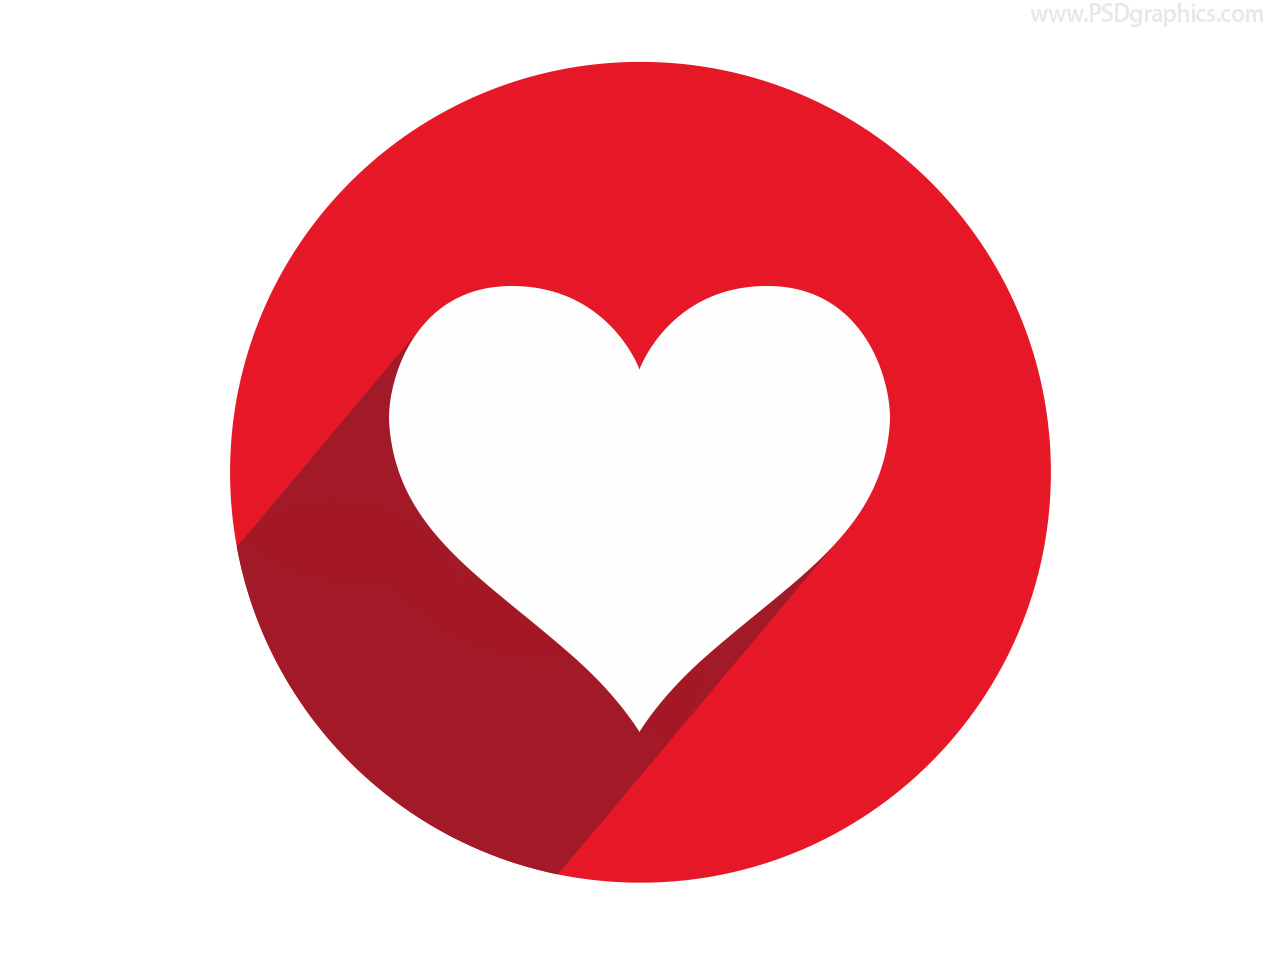 Heart shape button and icon (PSD) | PSDGraphics